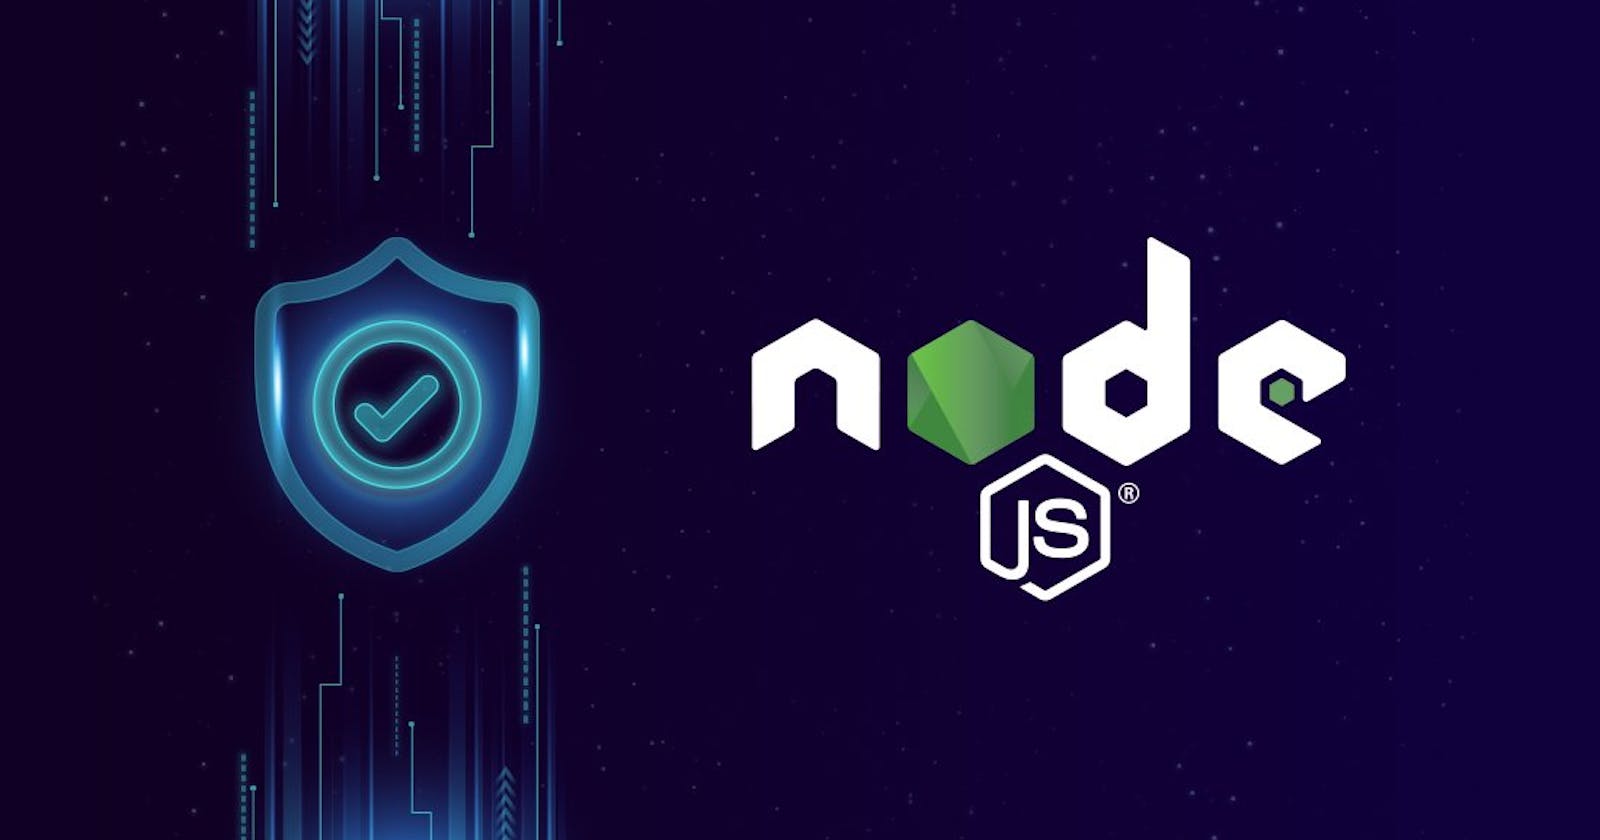 How to build an Authentication system using JWT in NodeJS: Part 1